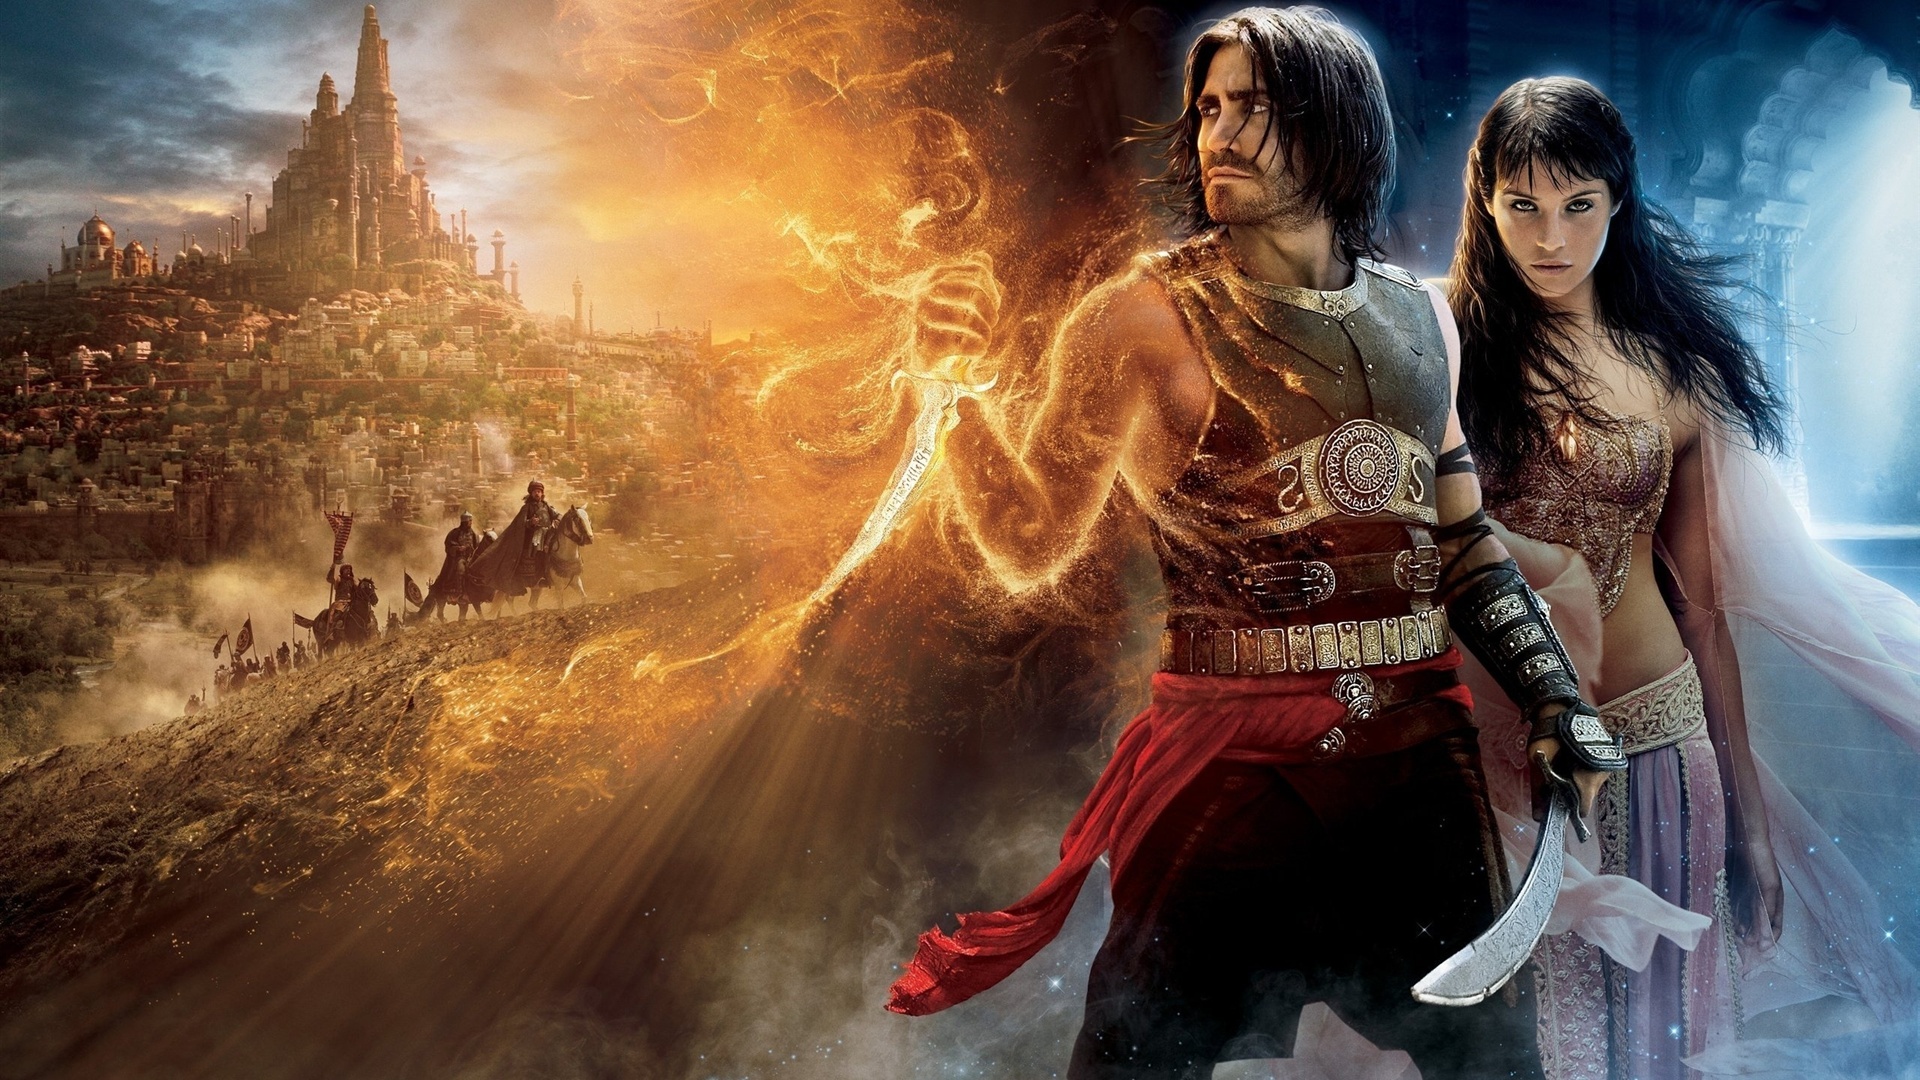 Prince Of Persia - Prince Of Persia The Sands Of Time 2010 , HD Wallpaper & Backgrounds